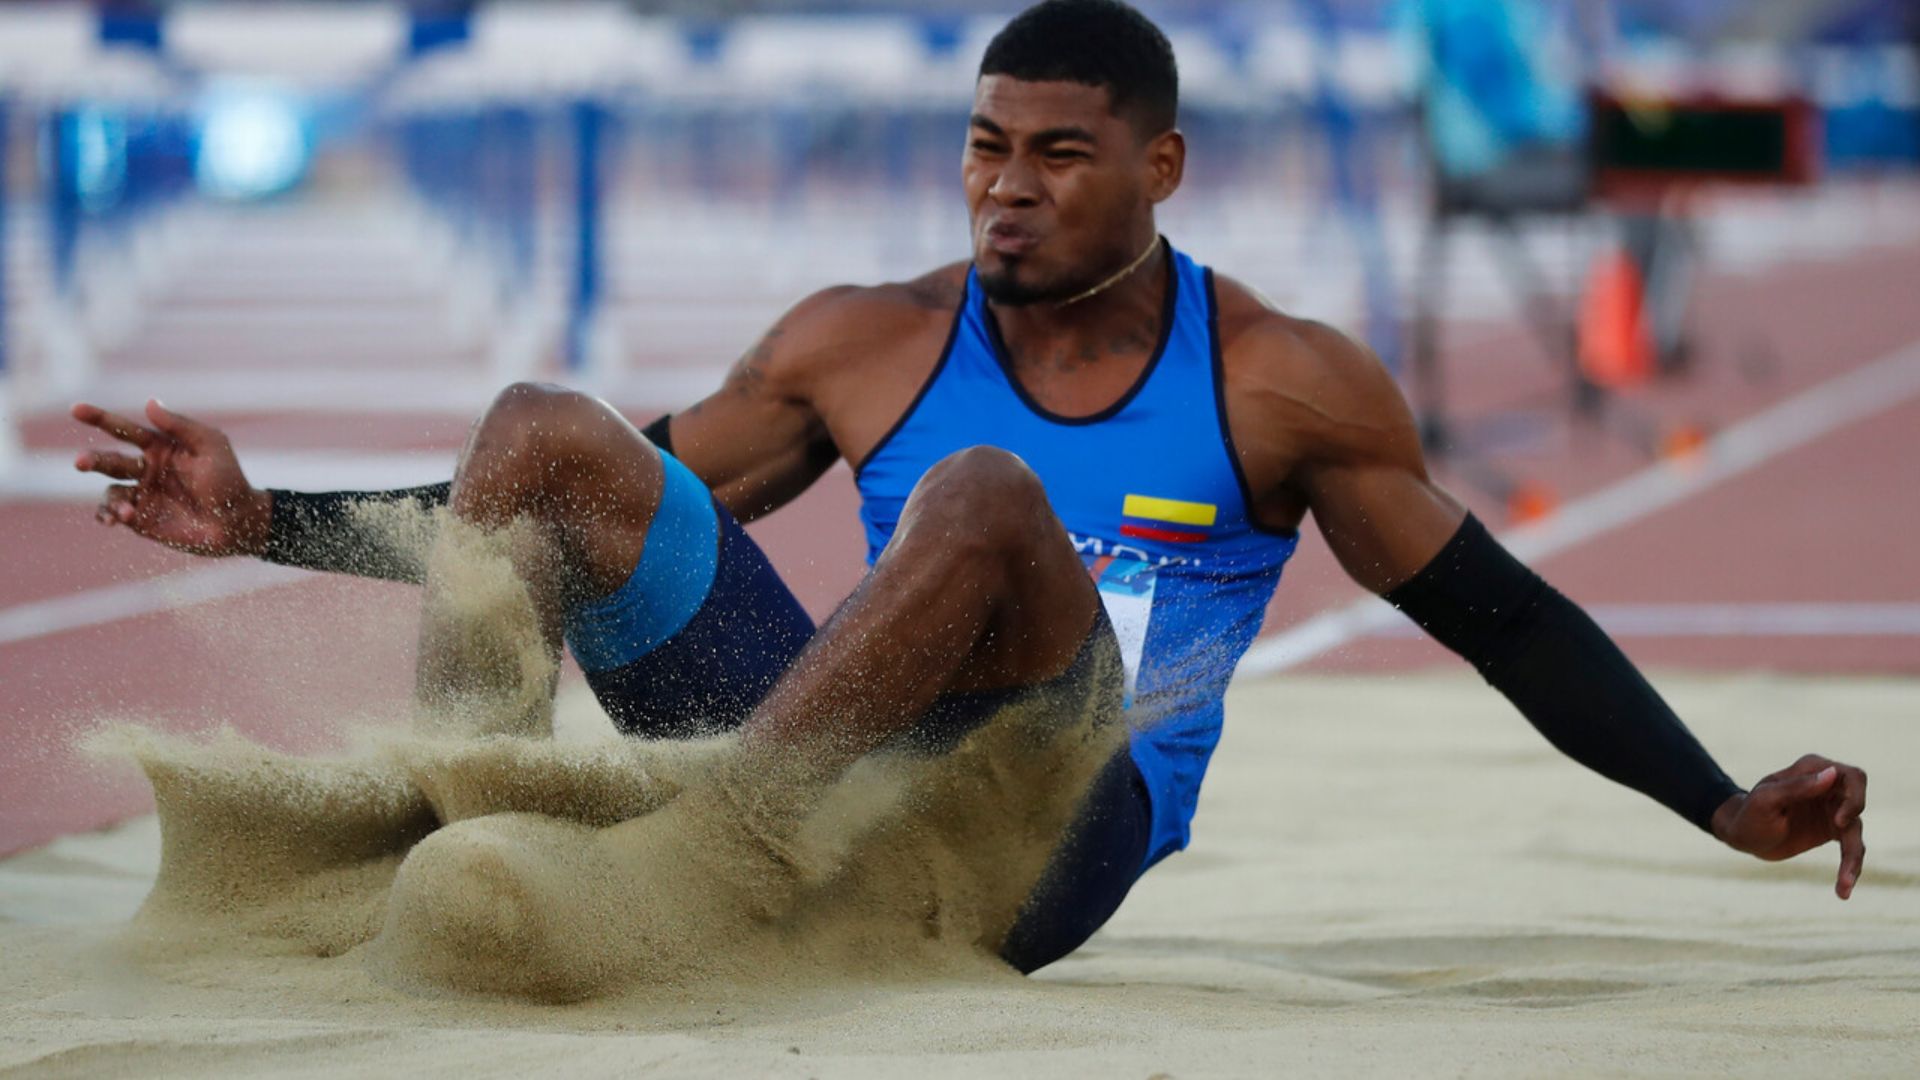 Arnovis Dalmero gives Colombia gold medal in long jump